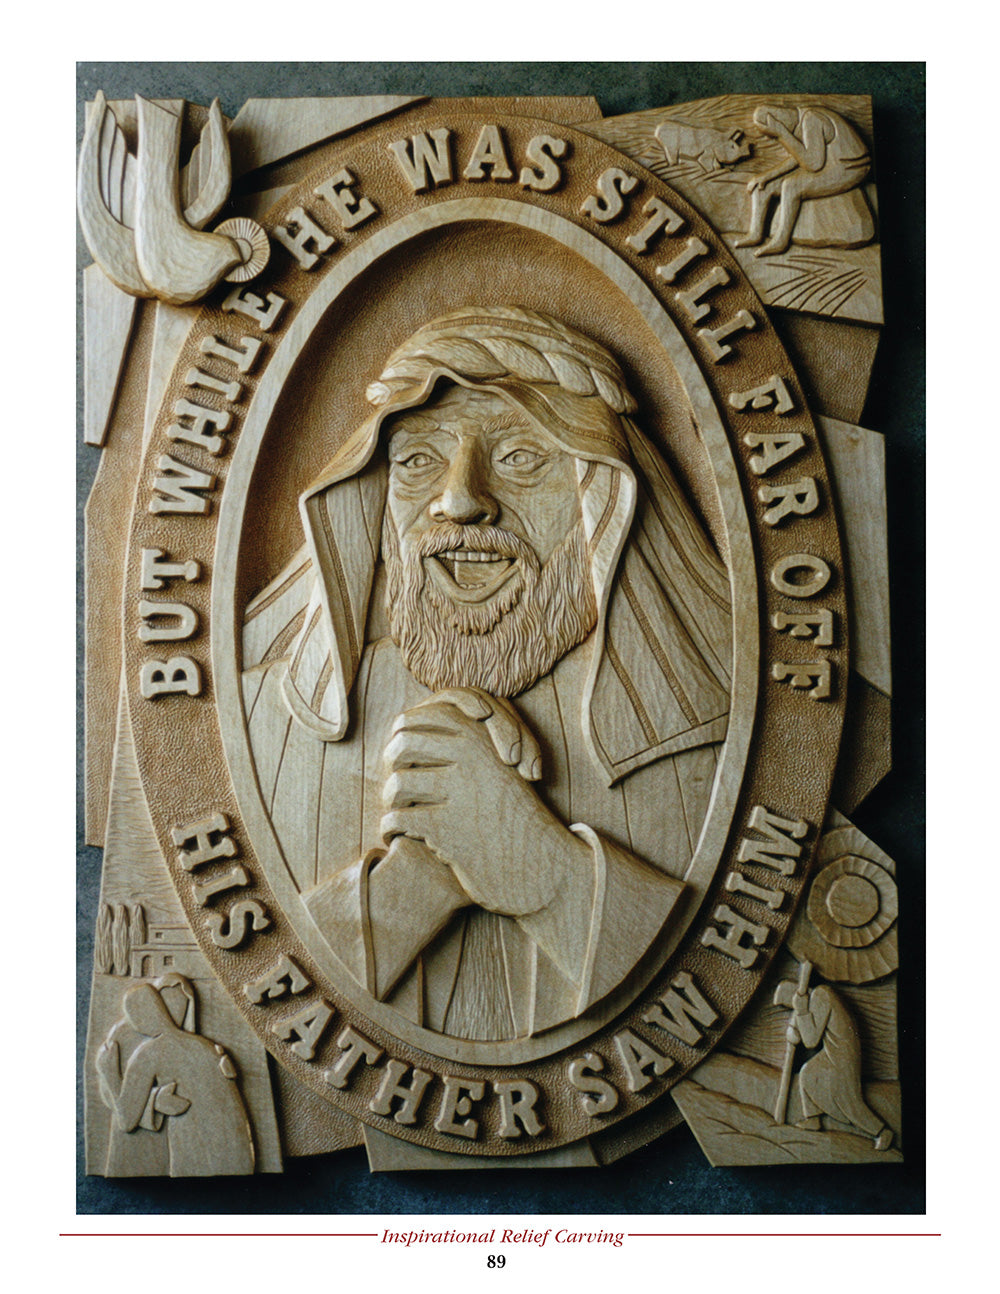 Inspirational Relief Carving